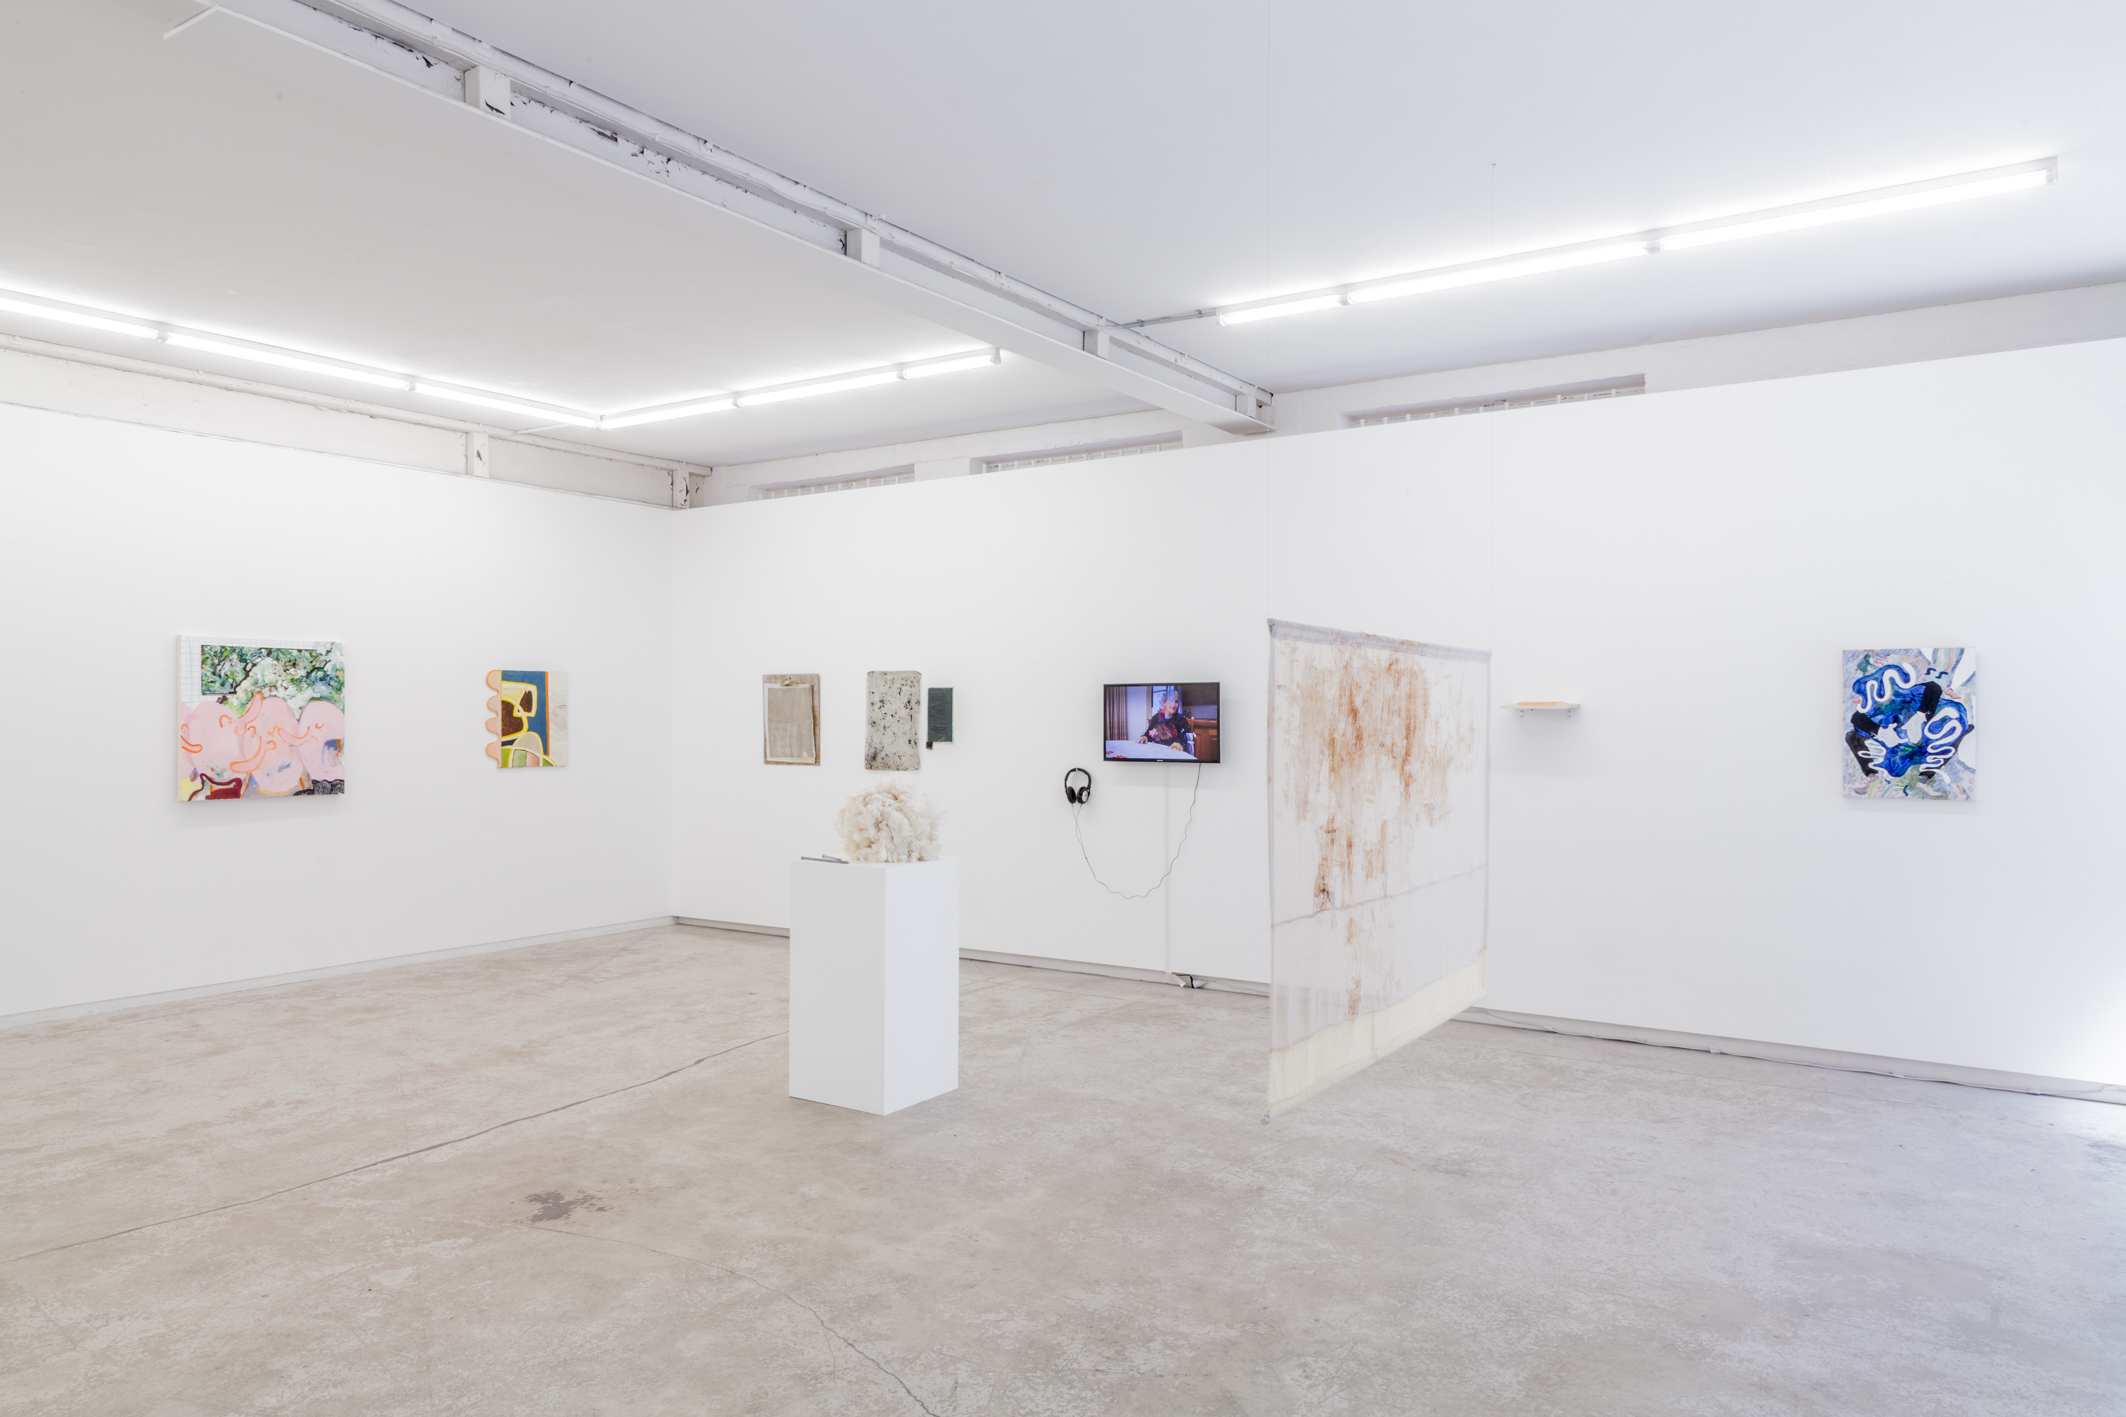 Minerva Offsite, “Language Face″, installation view, 33 Guildford Lane, Melbourne, 31 January – 28 February, 2015